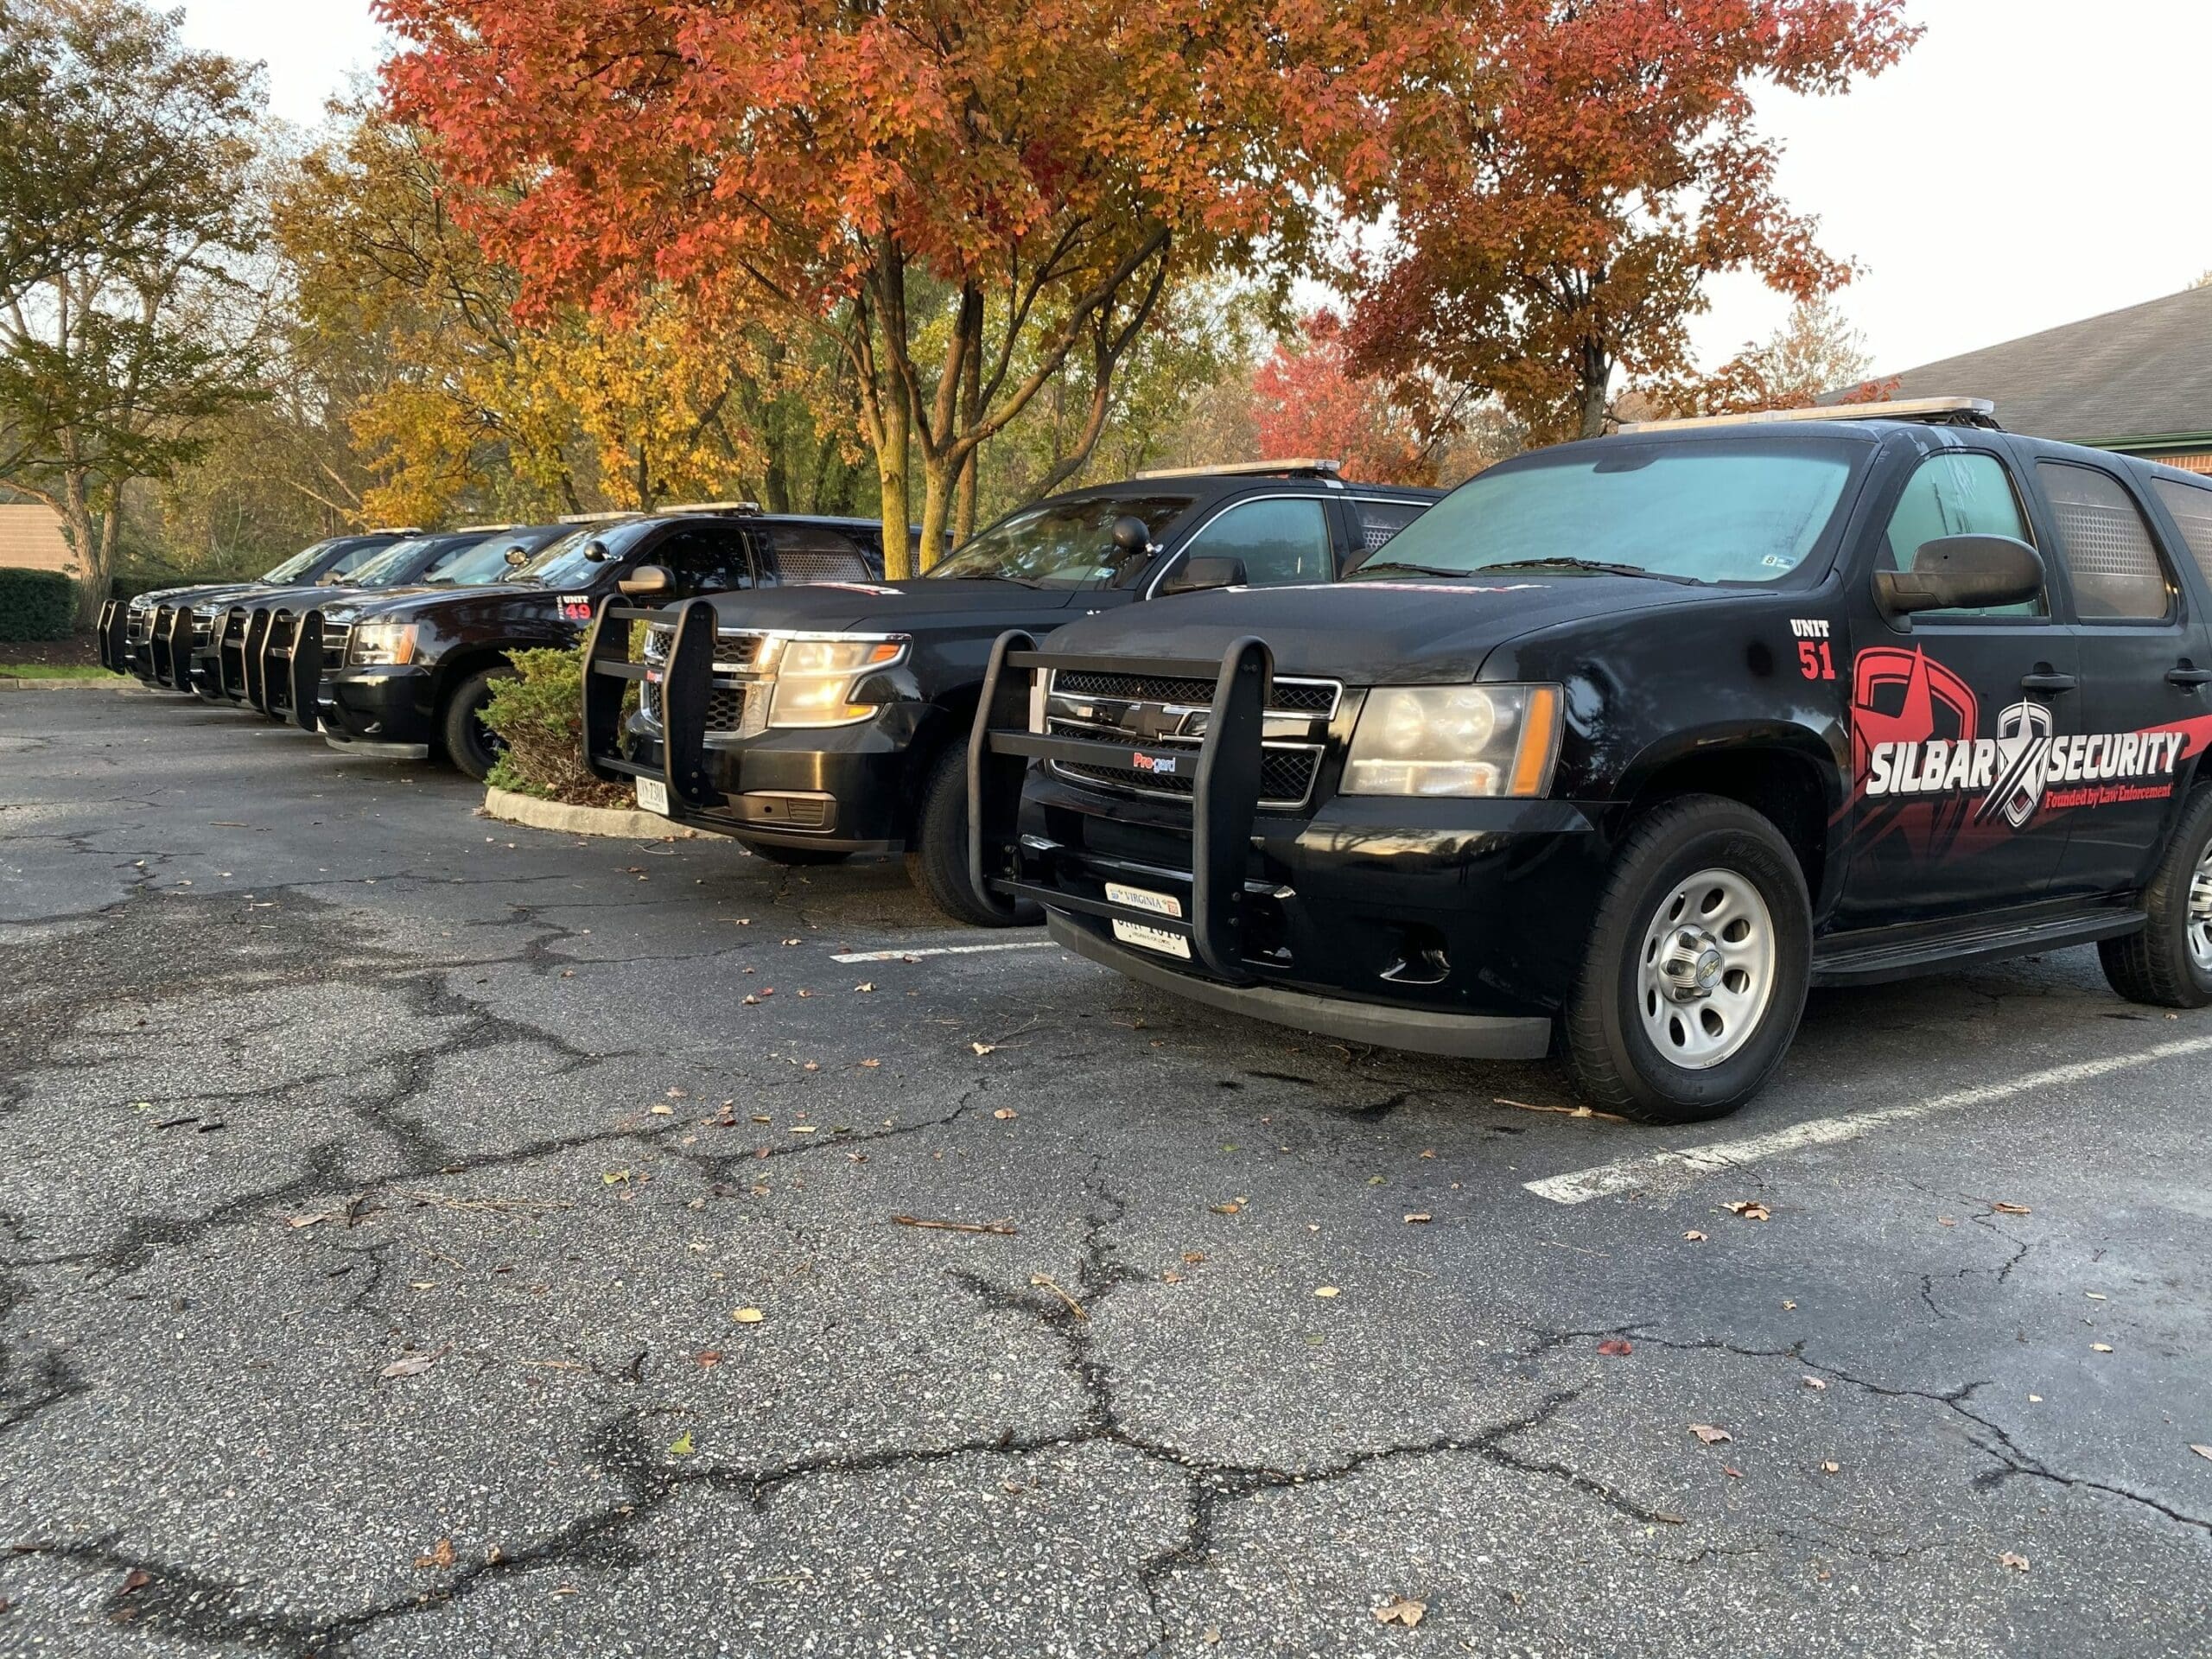 Security patrol vehicles in parking lot